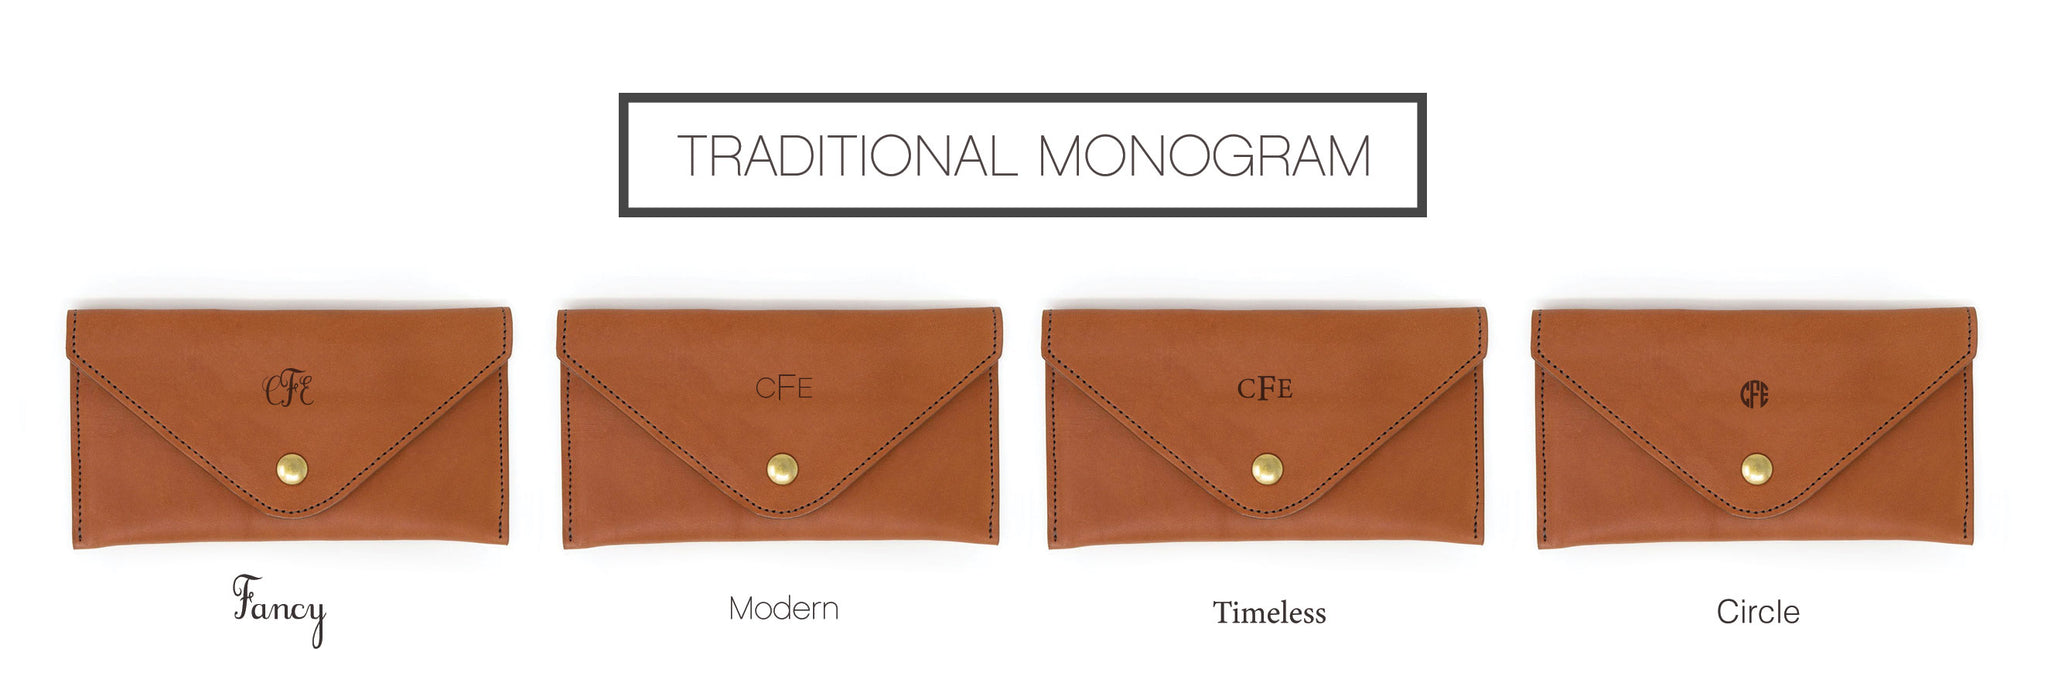 Traditional Monogram Memory Card Wallet Personalization Options